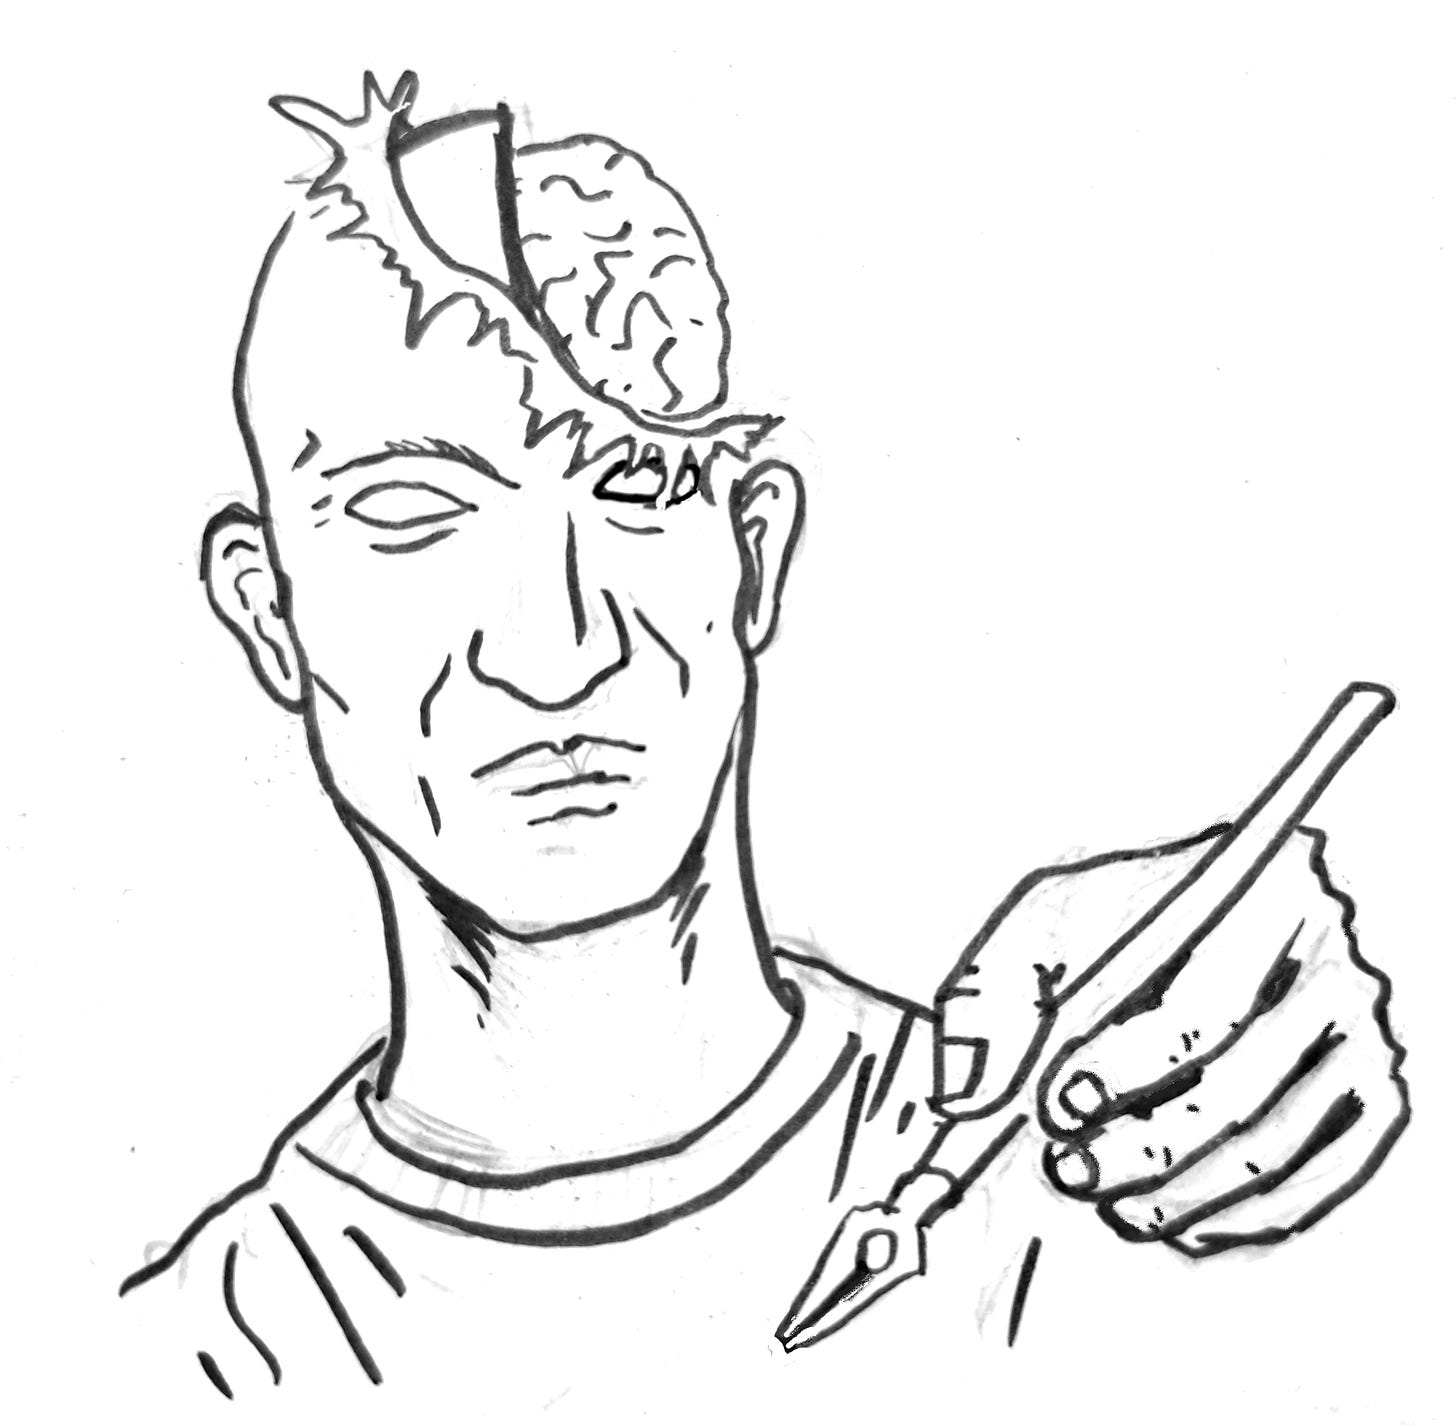 Guy holding a dip pen with eyes rolled back and brain exposed.